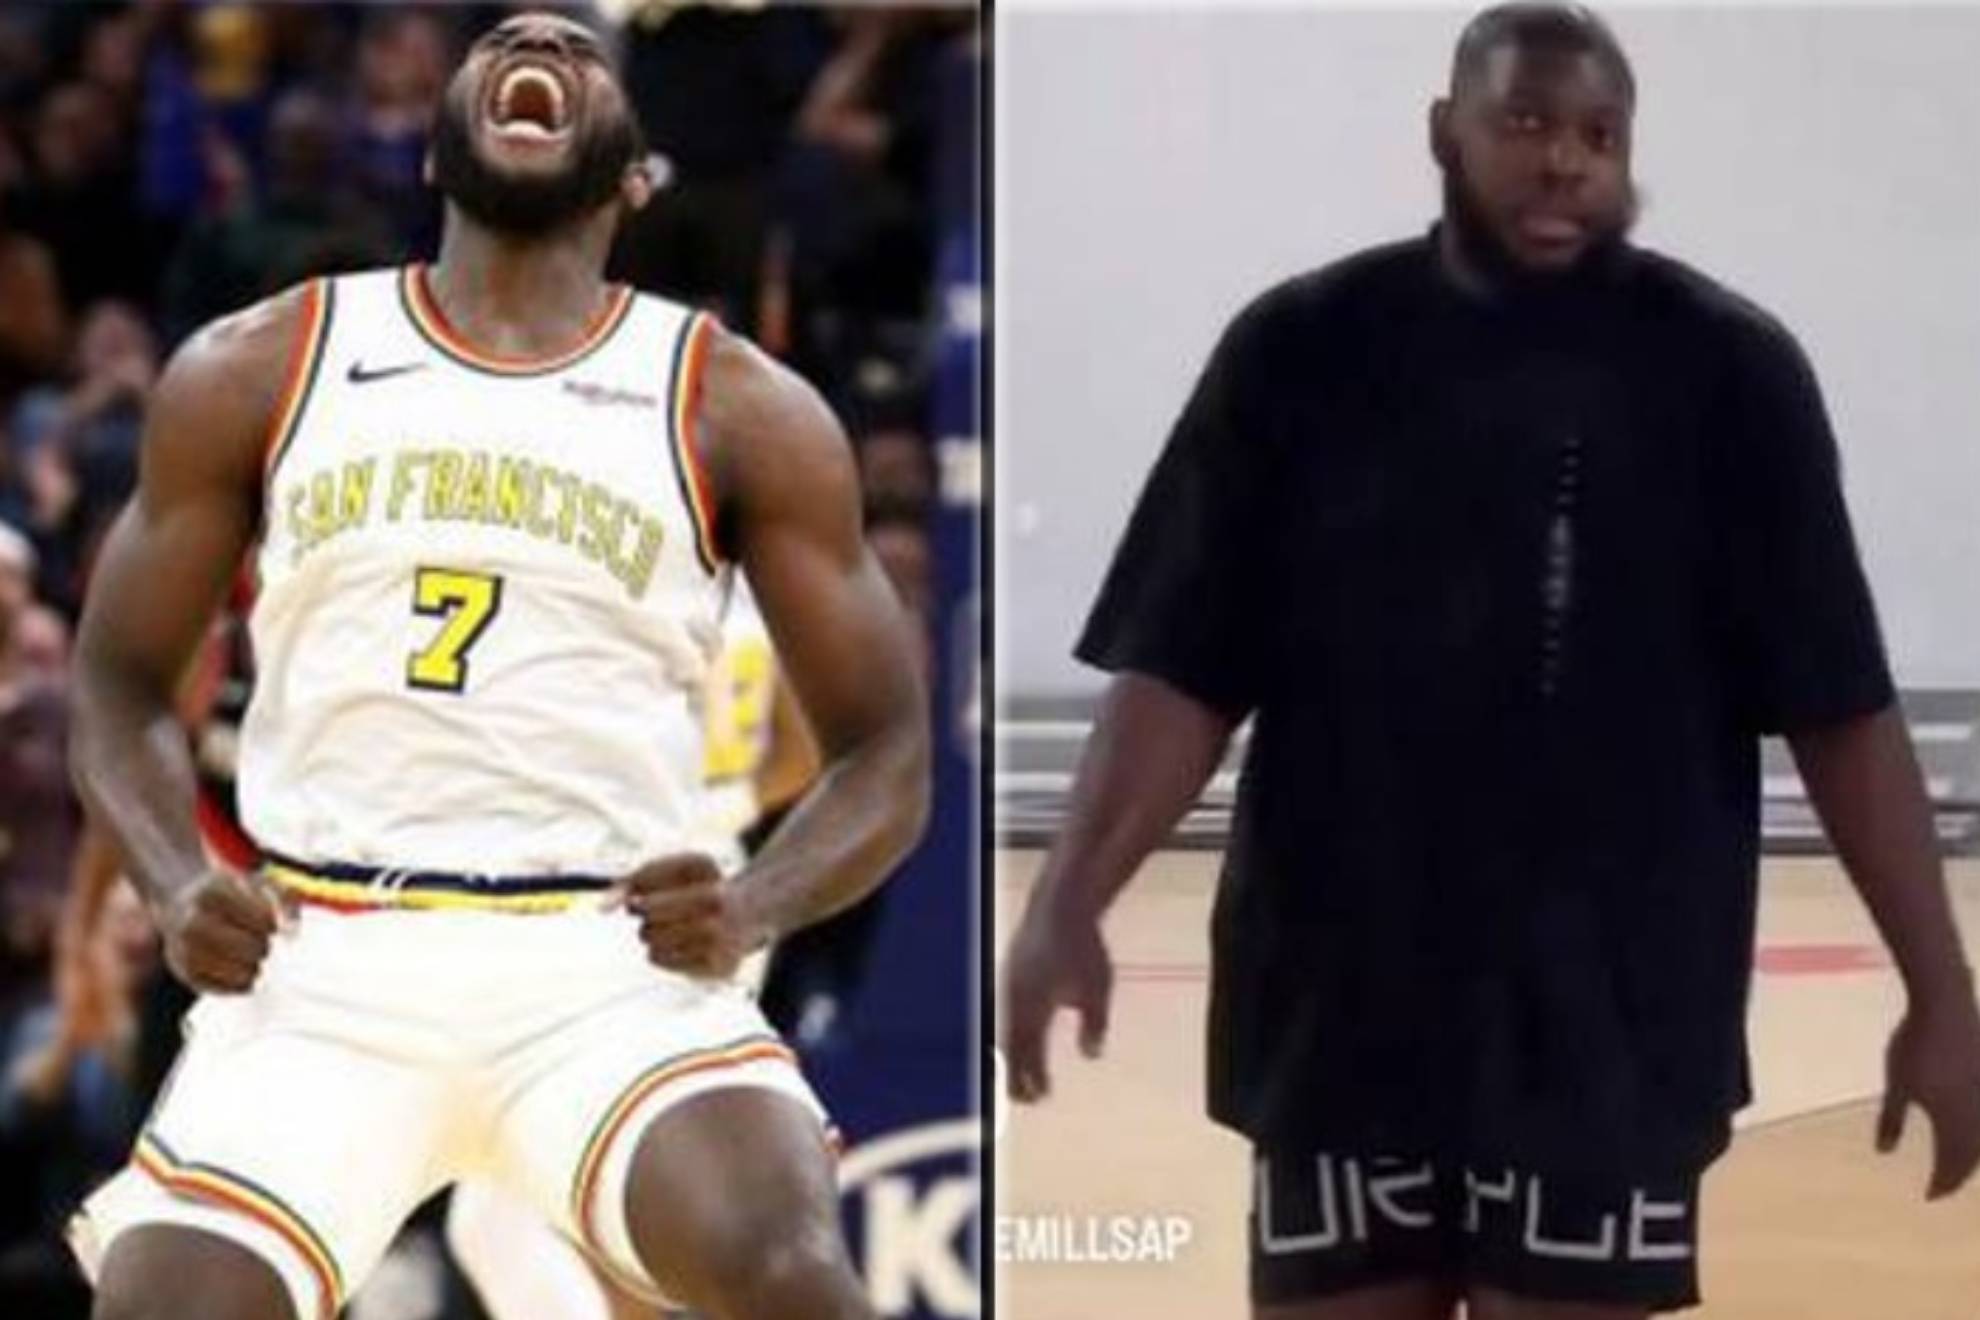 He played in the NBA and his physical condition at the age of 27 is a cause for concern: the viral mutation of Eric Paschal, former Warriors player